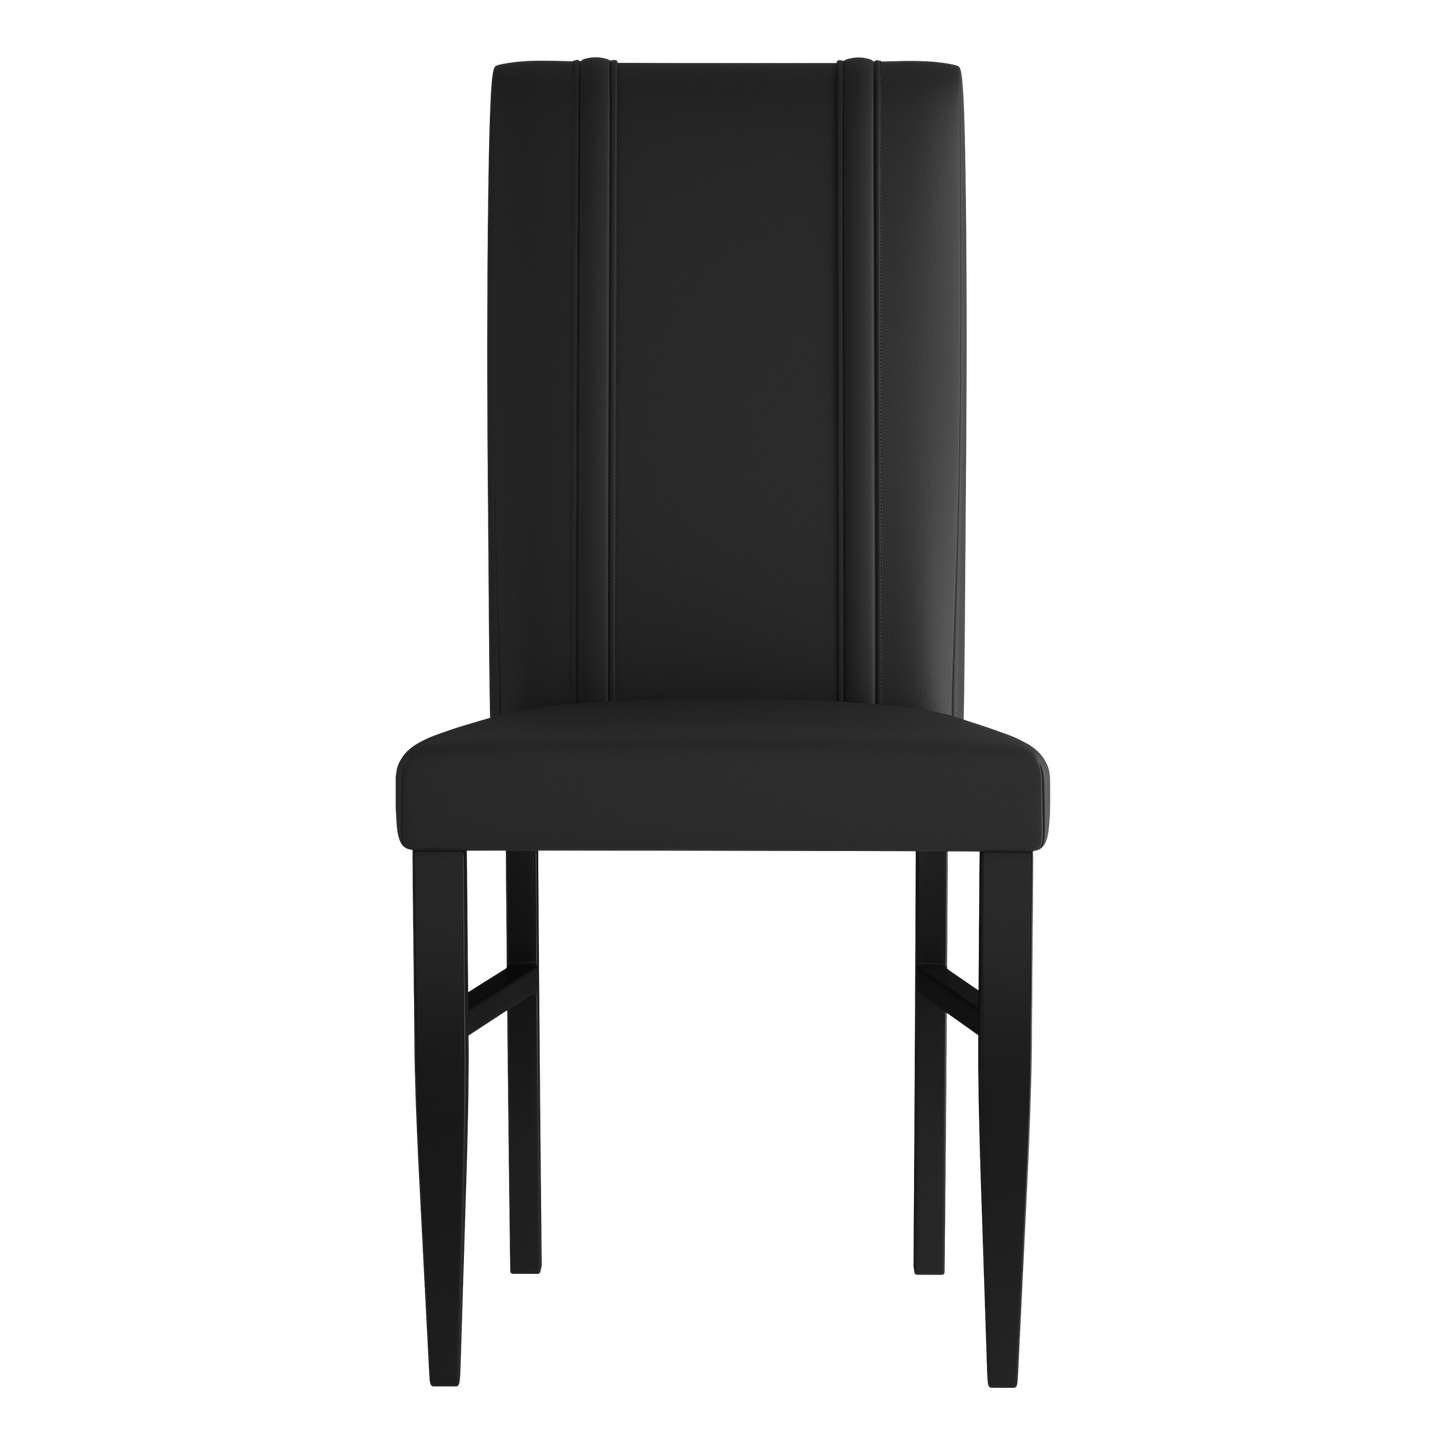 Side Chair 2000 with DC United FC Logo Set of 2